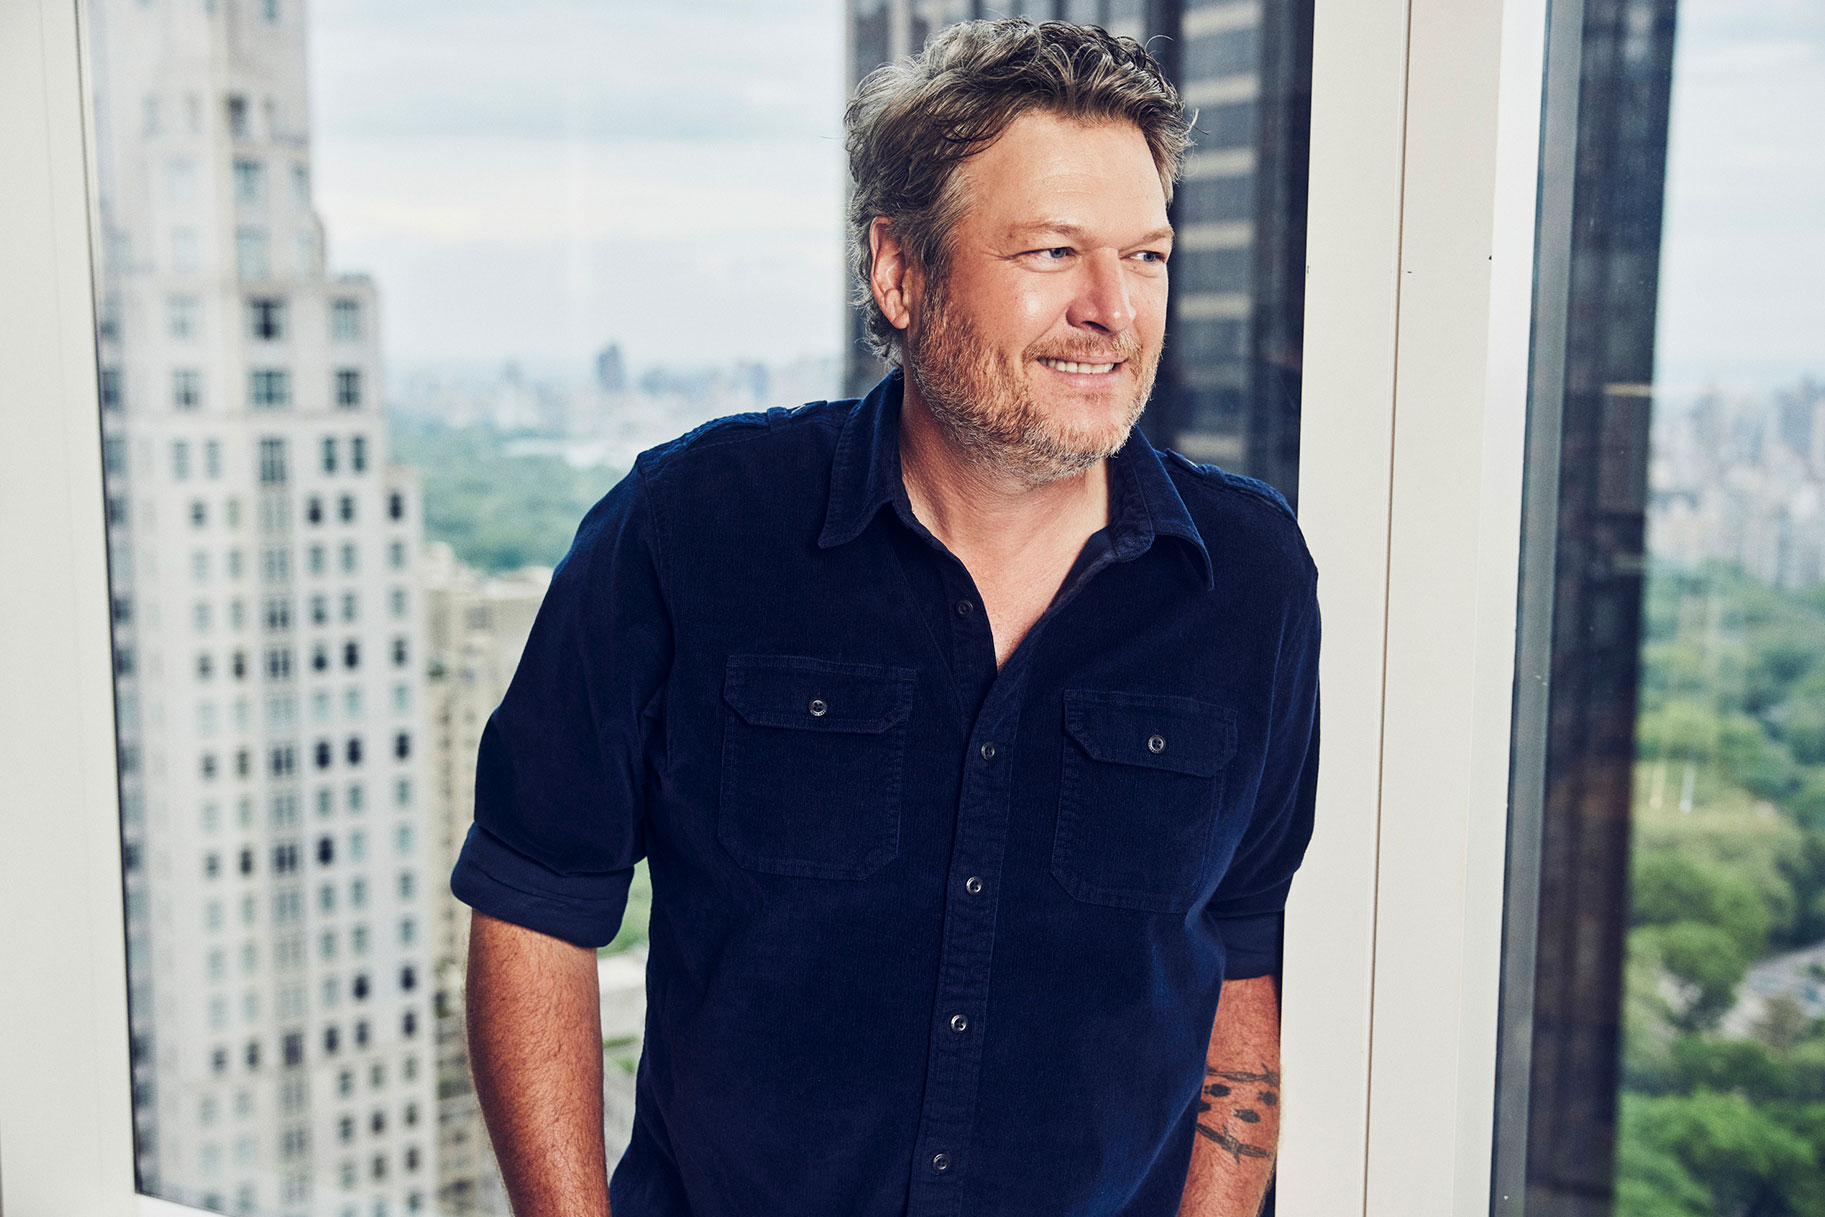 Blake Shelton standing in front of large windows overlooking a big city